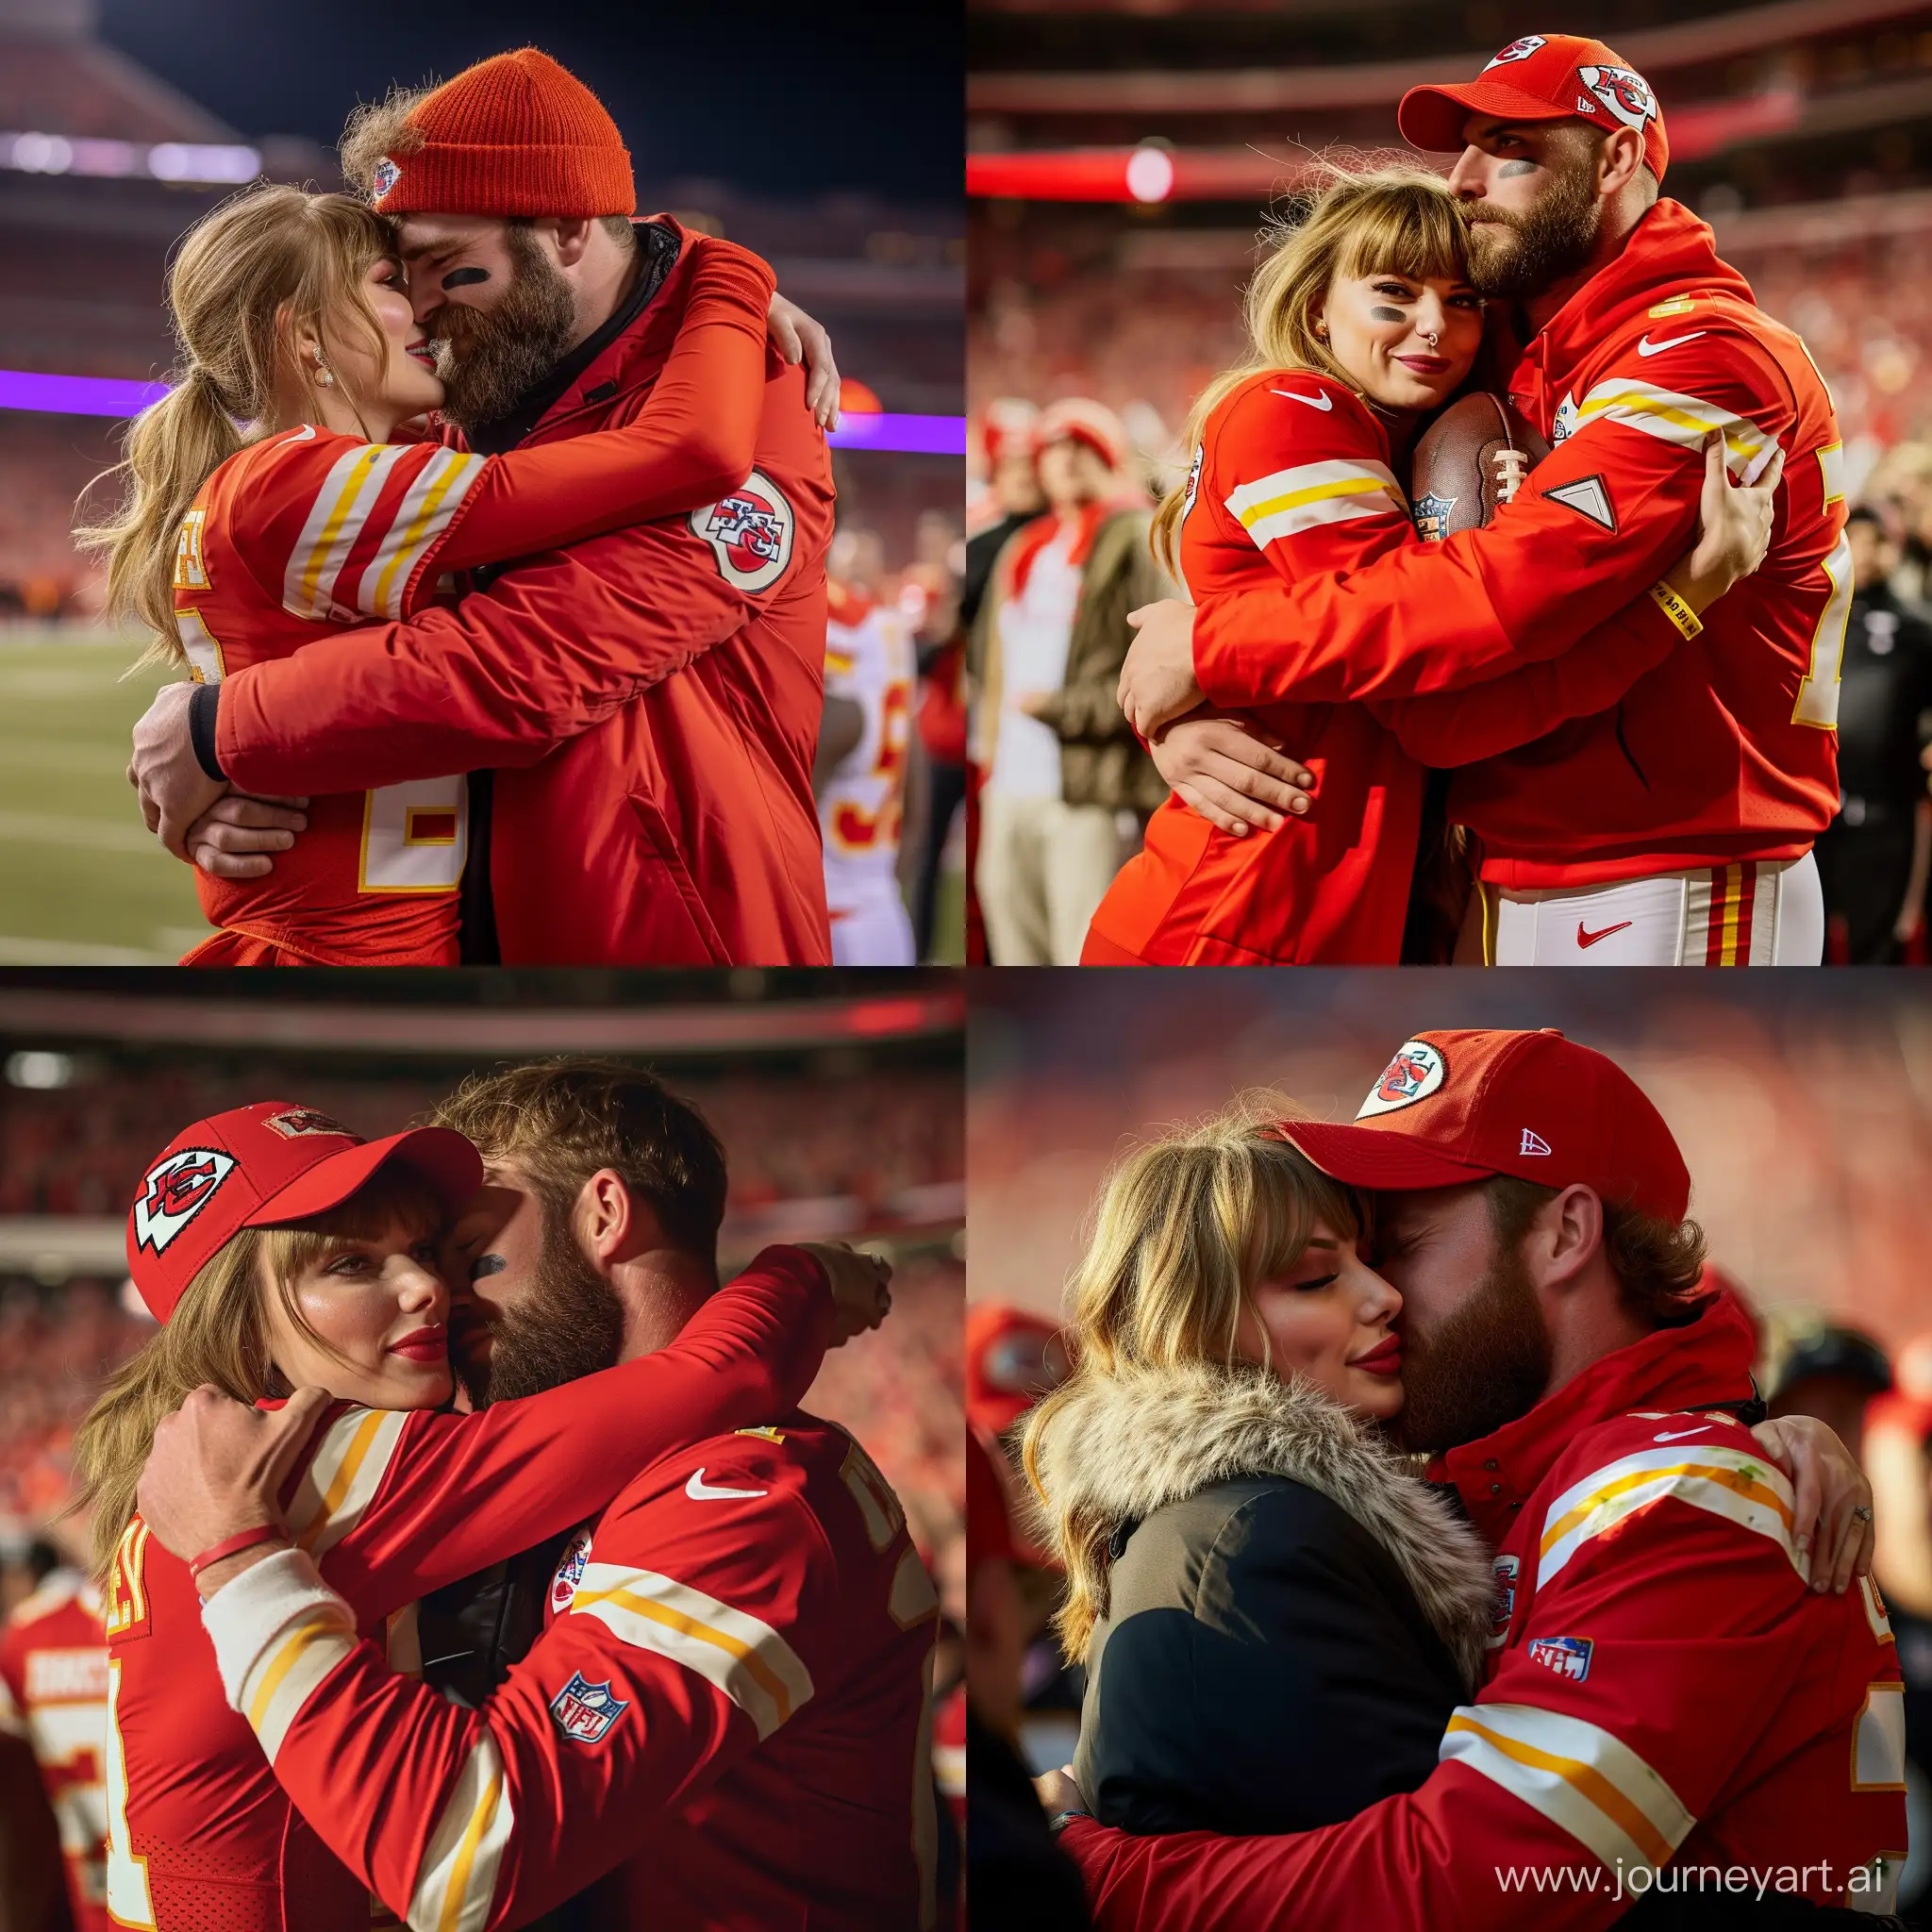 Realistic 8k image of Taylor Swift and Travis kelce embracing in a hug after watching the Kansas City chiefs win the game to get them to the superbowl